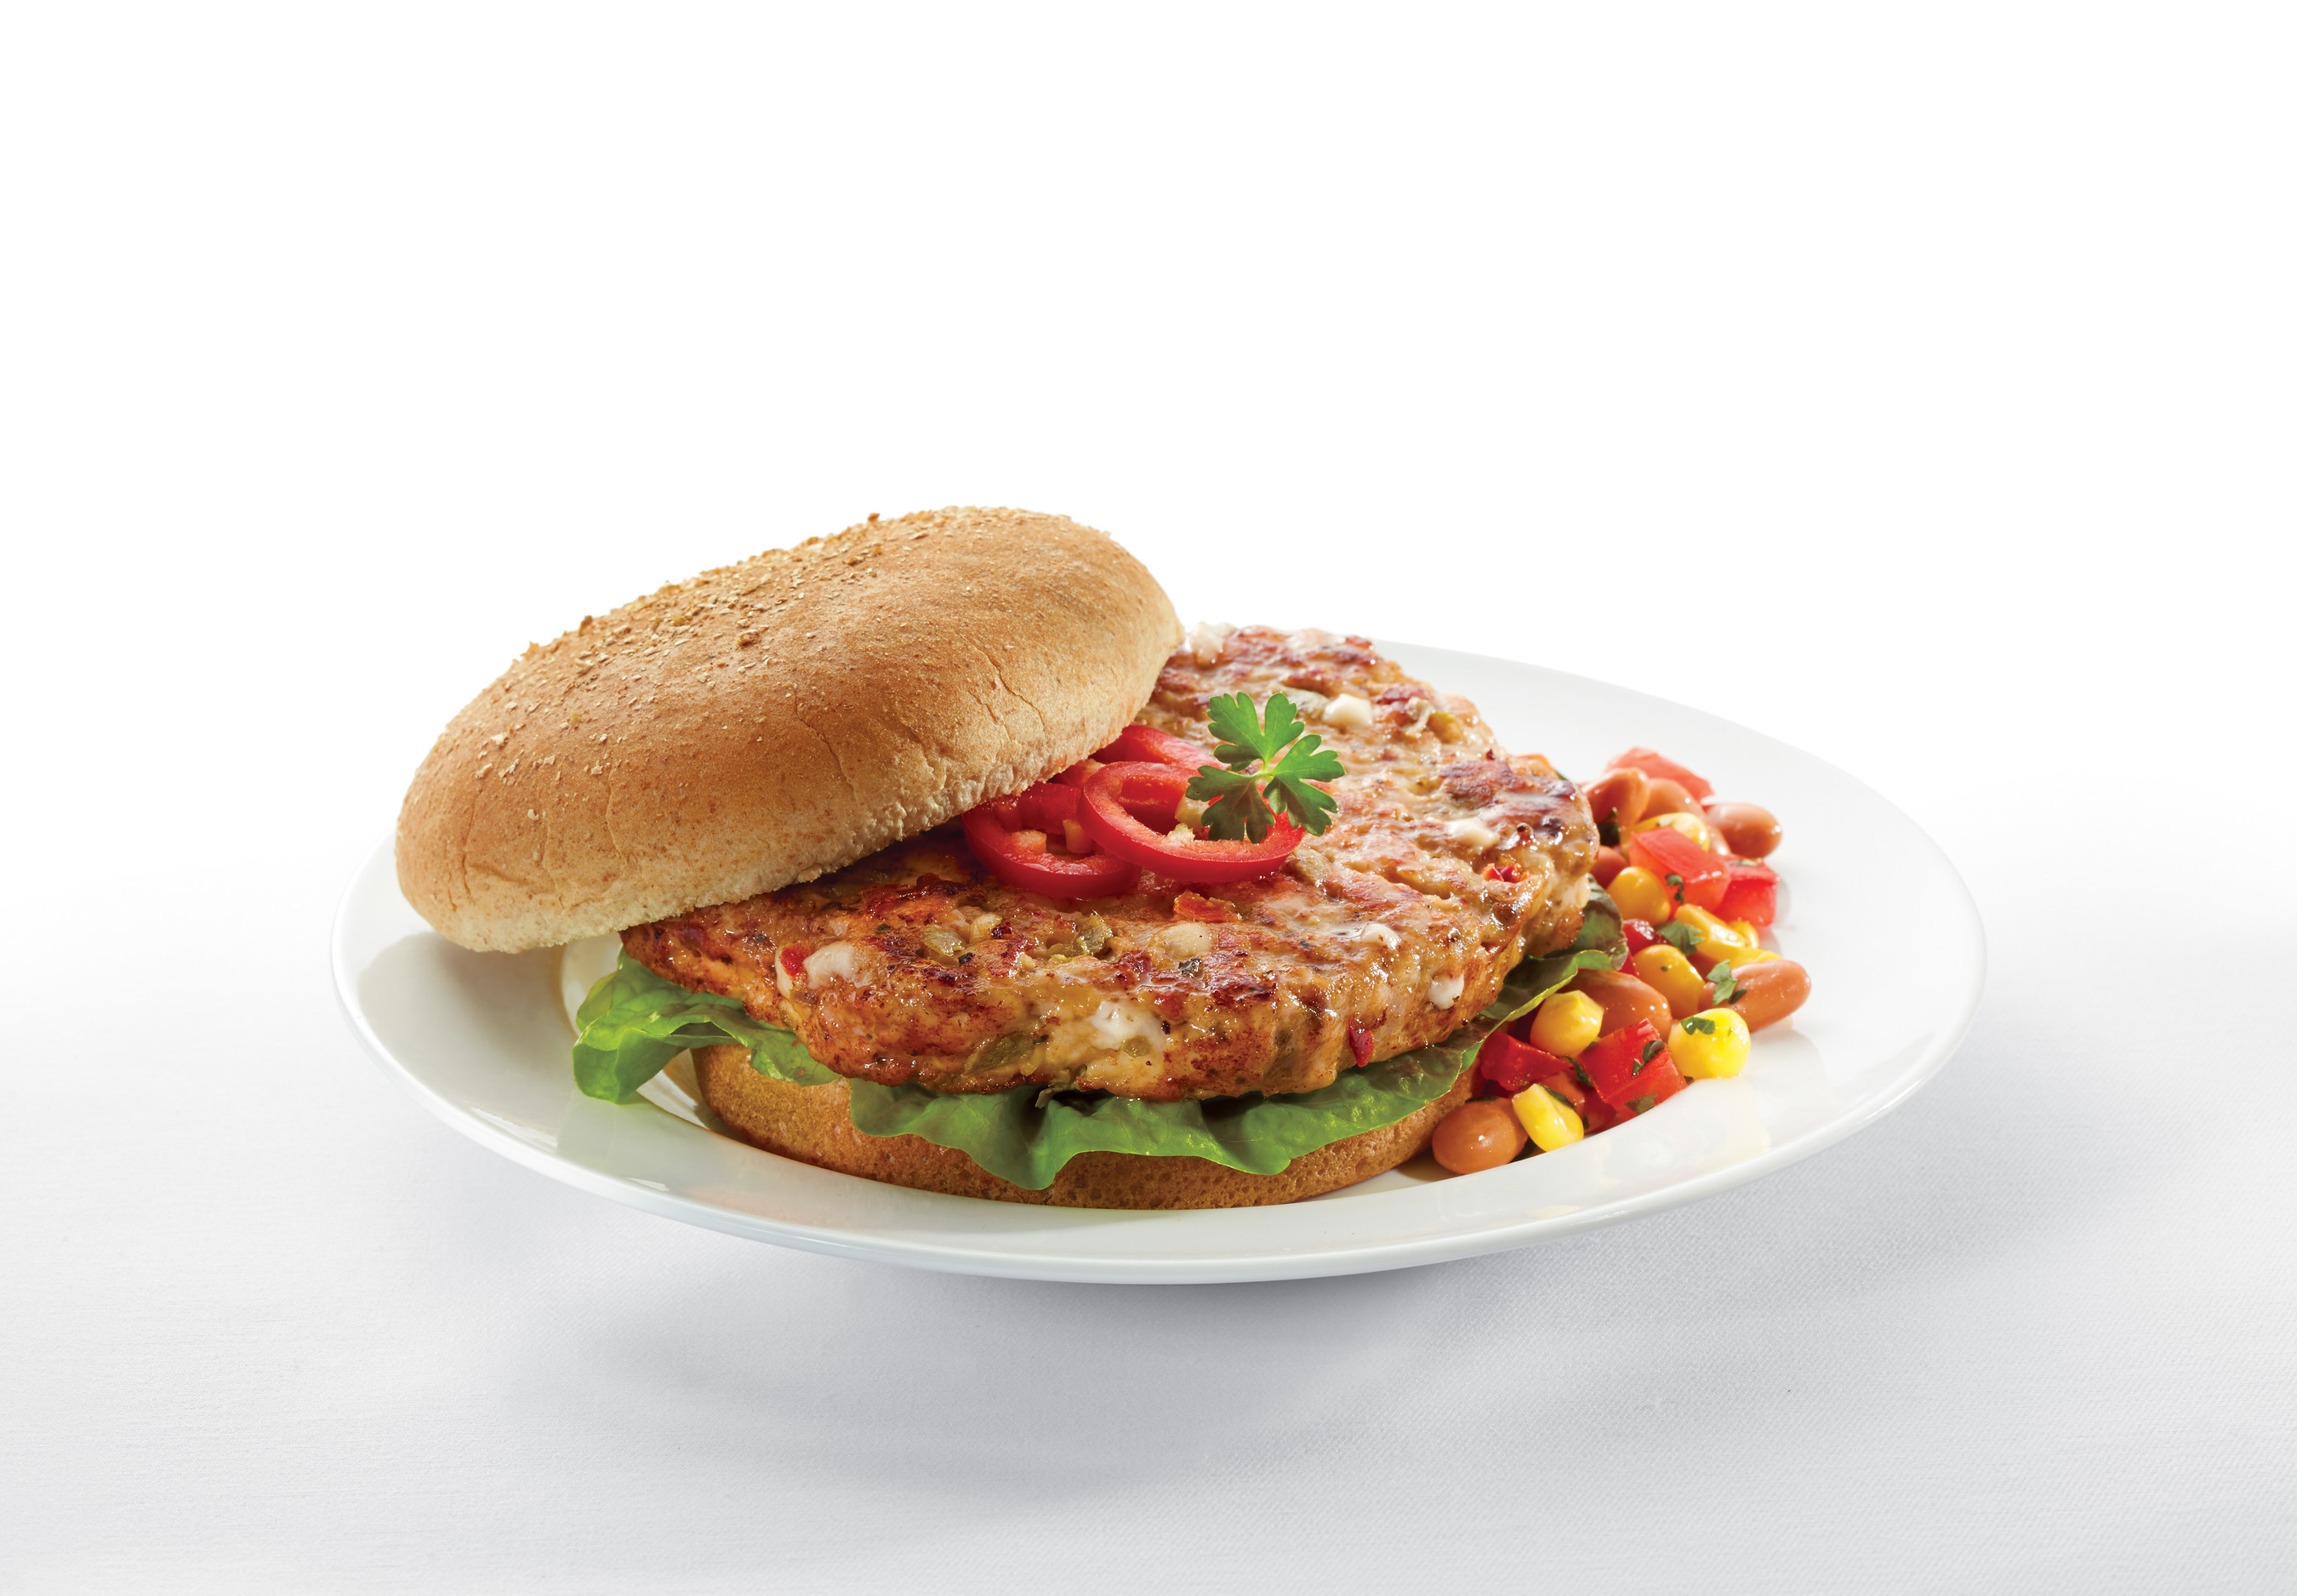 Gold'n Plump Tex Mex Chicken Patties, made from premium quality all natural boneless skinless chicken thighs, will be available beginning mid-May 2015.